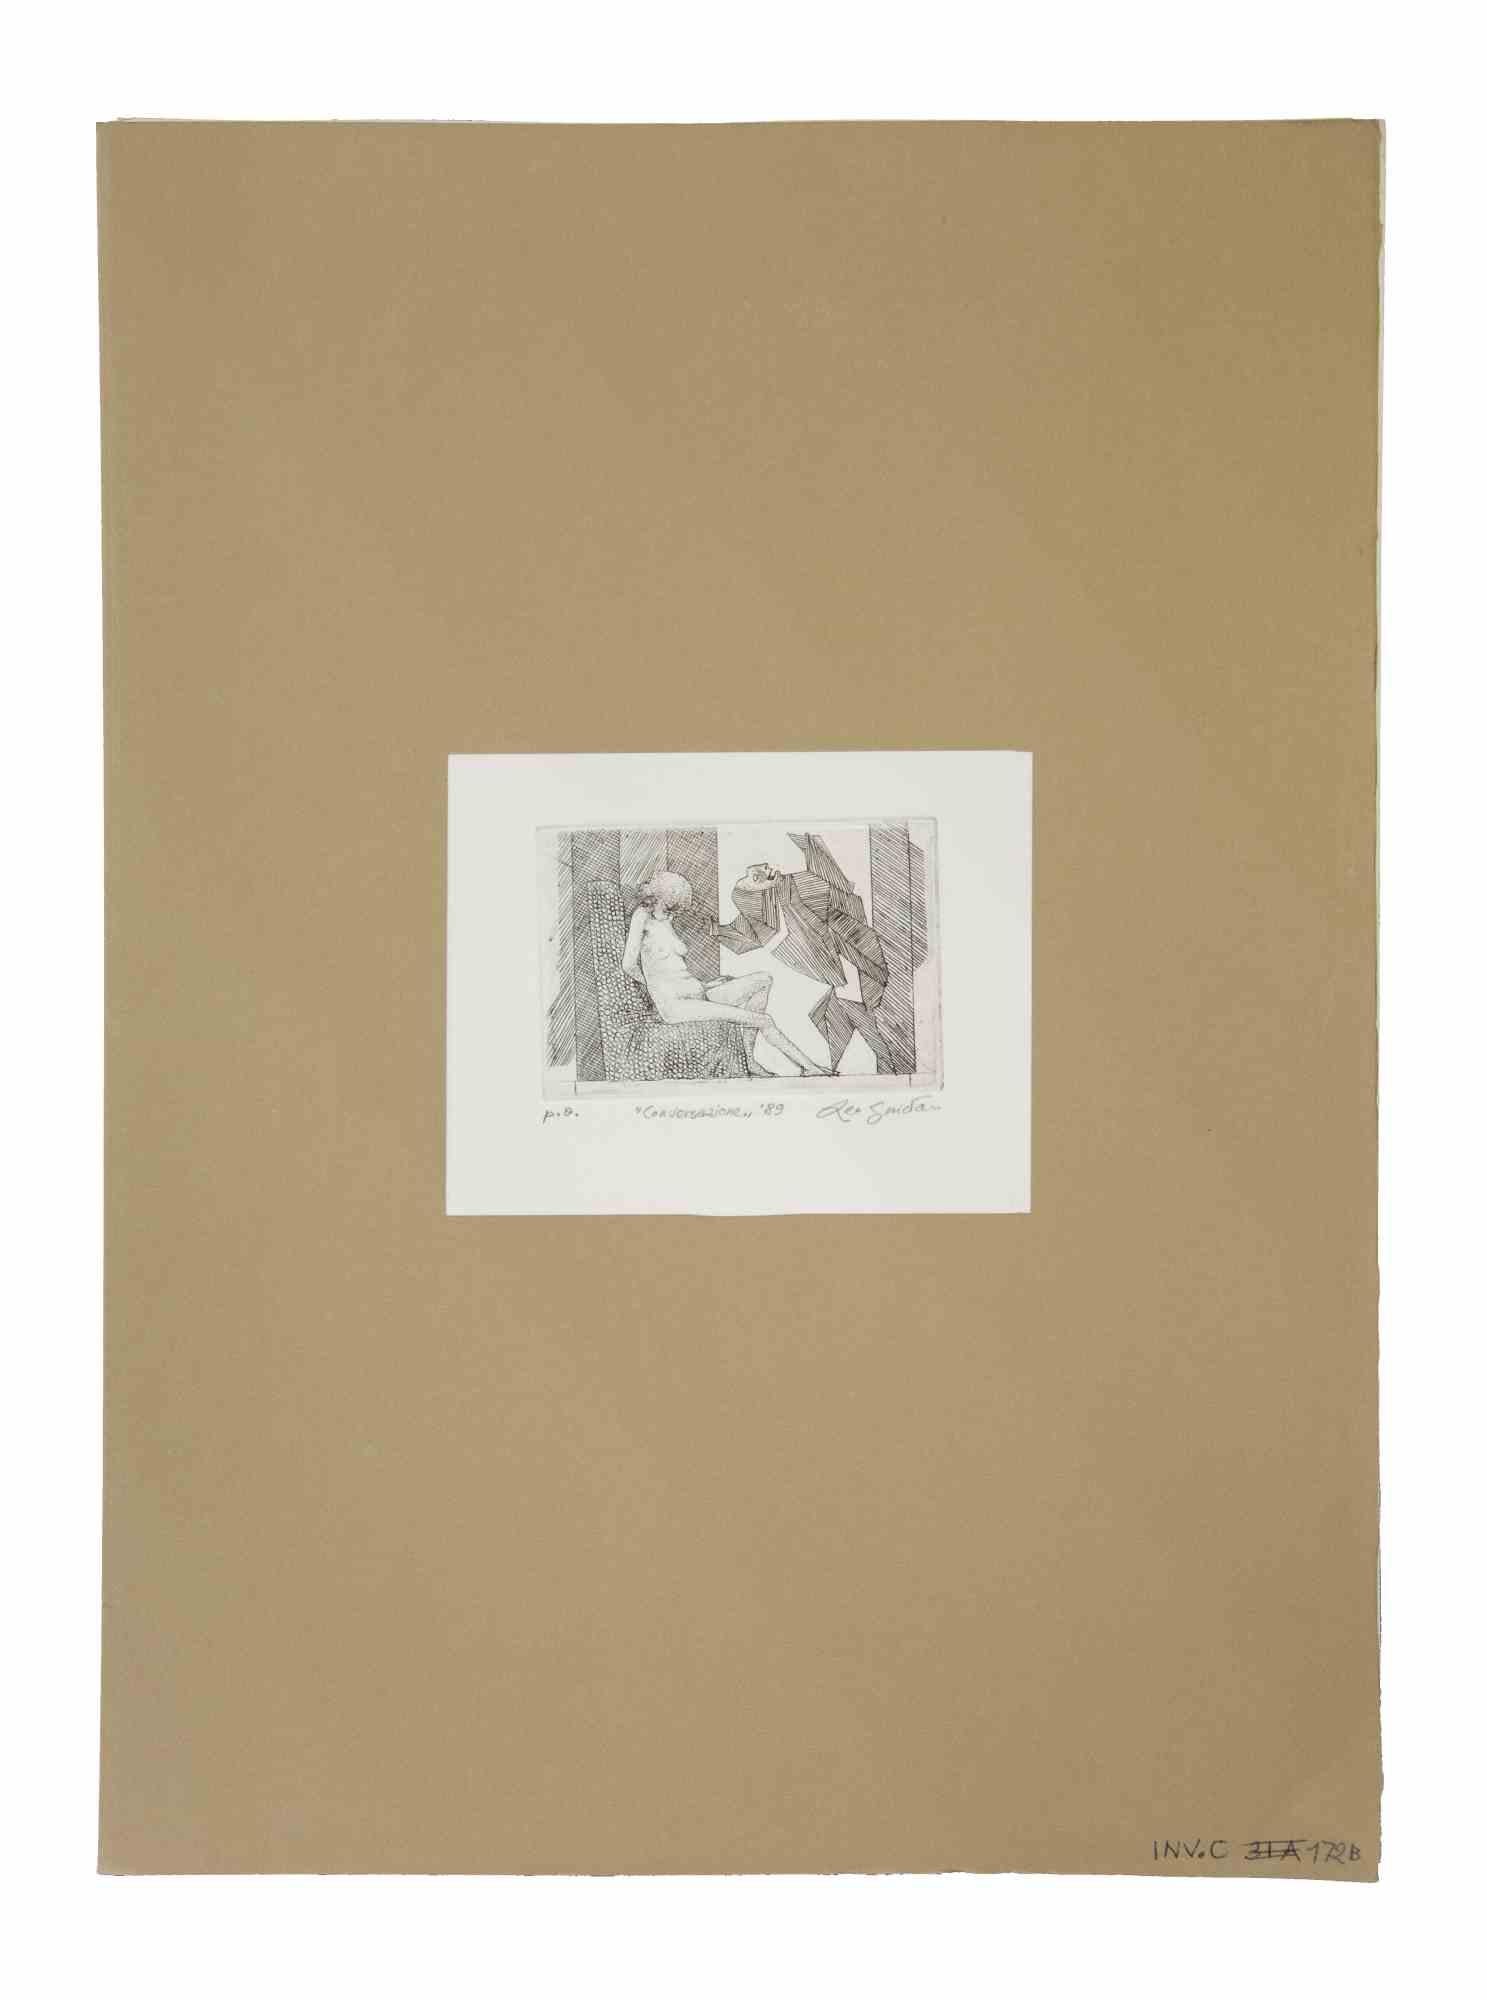 Conversation is an original etching and drypoint realized by Leo Guida in 1989.

Good condition.

Mounted on a white cardboard passpartout (50x35 cm), also with a brown passpartout.

Hand signed and dated with pencil, artist proof.

Leo Guida  (1992